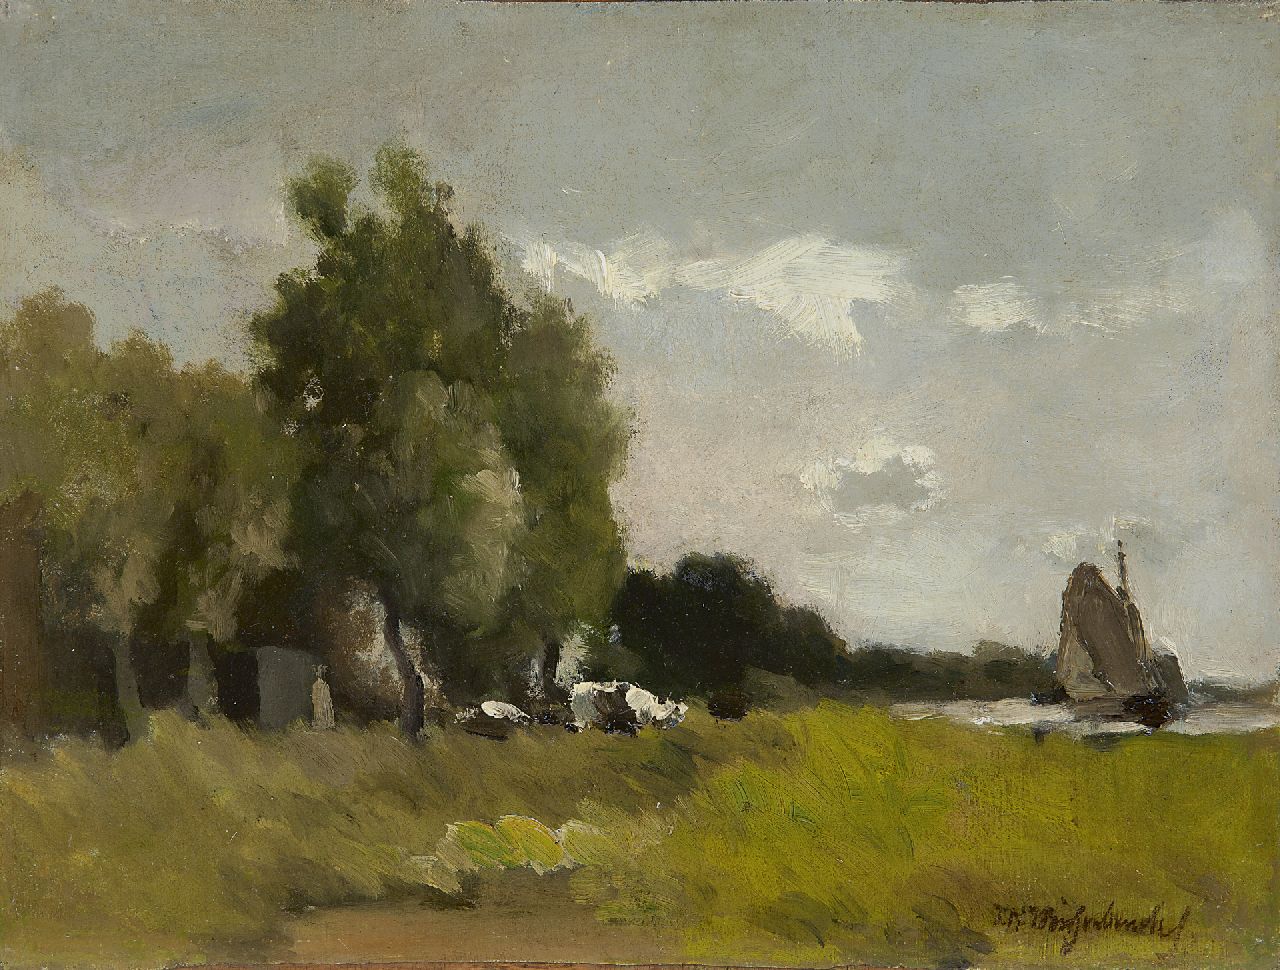 Weissenbruch H.J.  | Hendrik Johannes 'J.H.' Weissenbruch, A polder landscape, oil on canvas laid down on panel 23.8 x 31.7 cm, signed l.r. and painted ca. 1890-1900